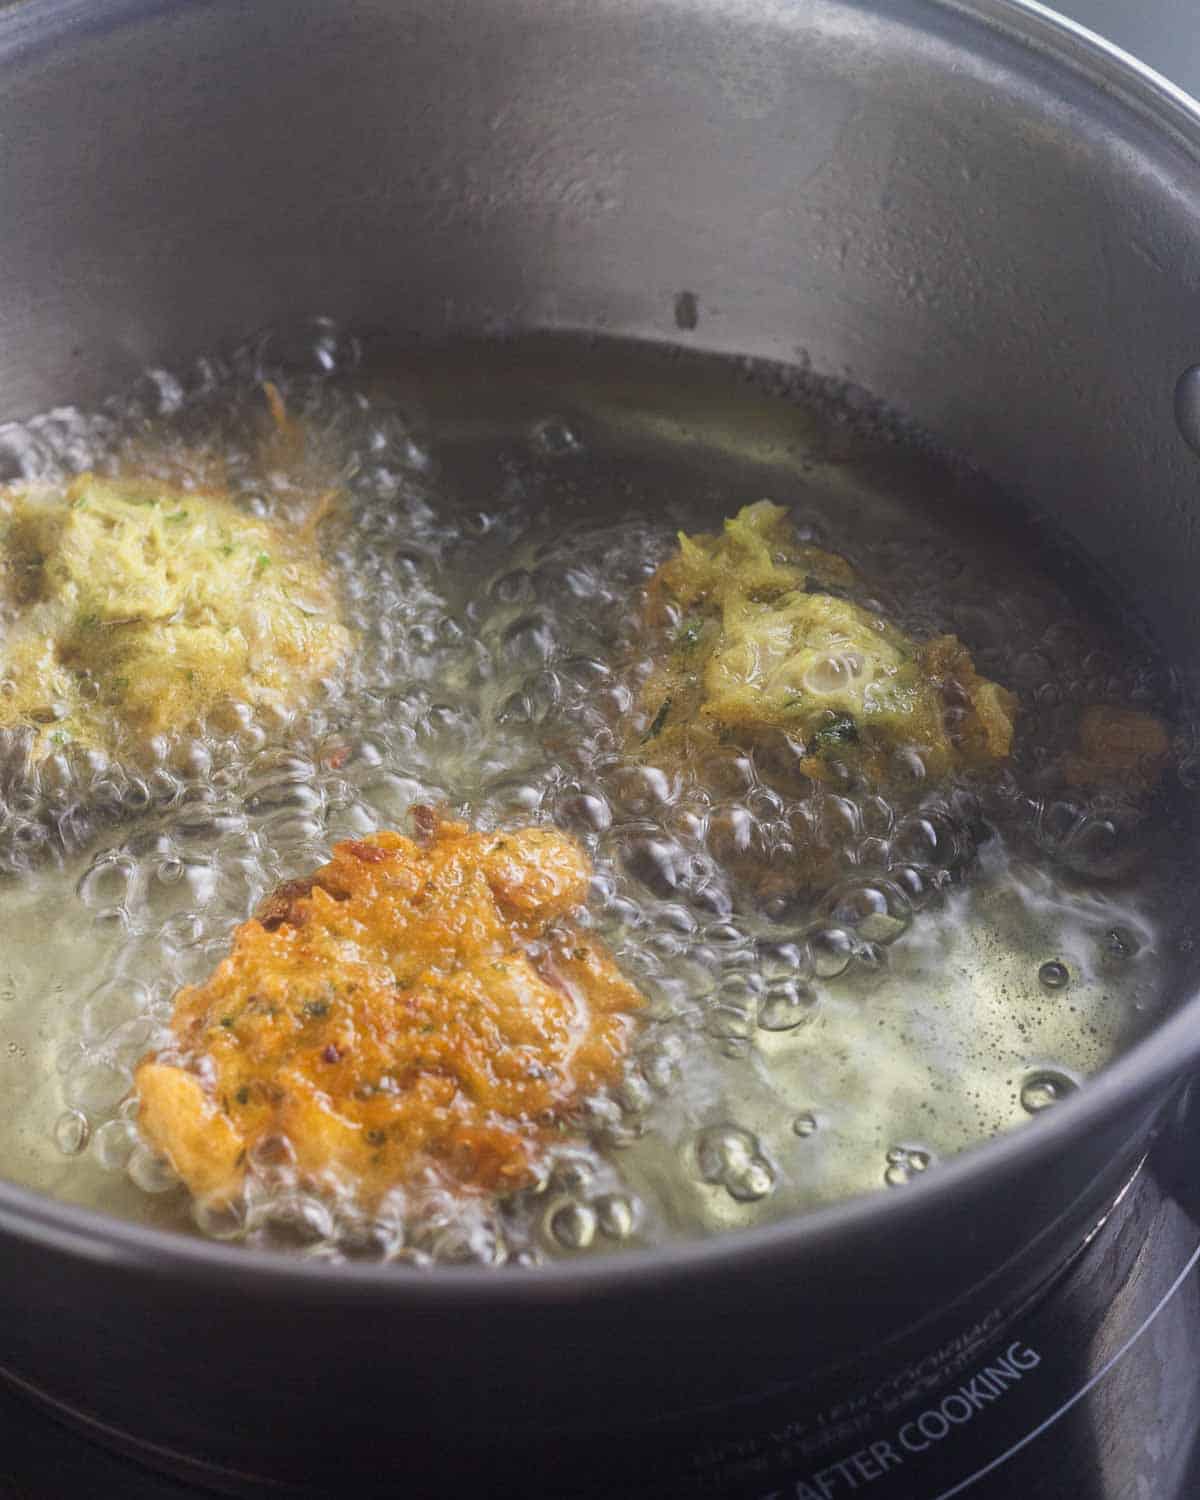 Three cod fritters frying in oil.